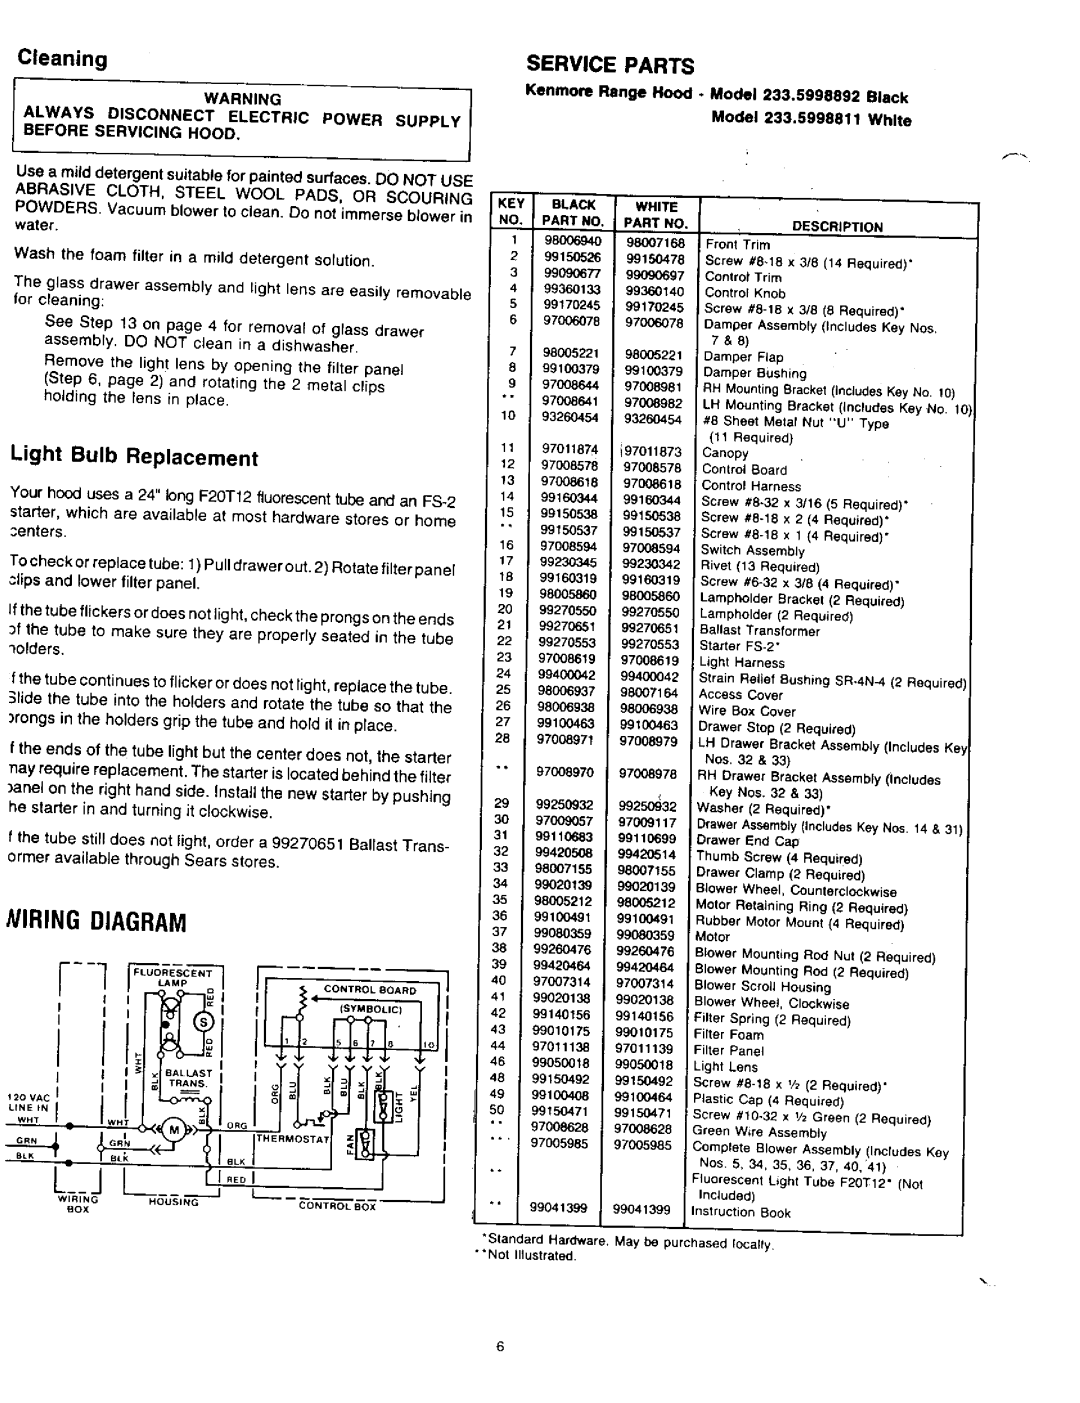 Kenmore 233.5998811, 233.5998892 owner manual Niring Diagram, Cleaning, Service Parts, Light Bulb Replacement 